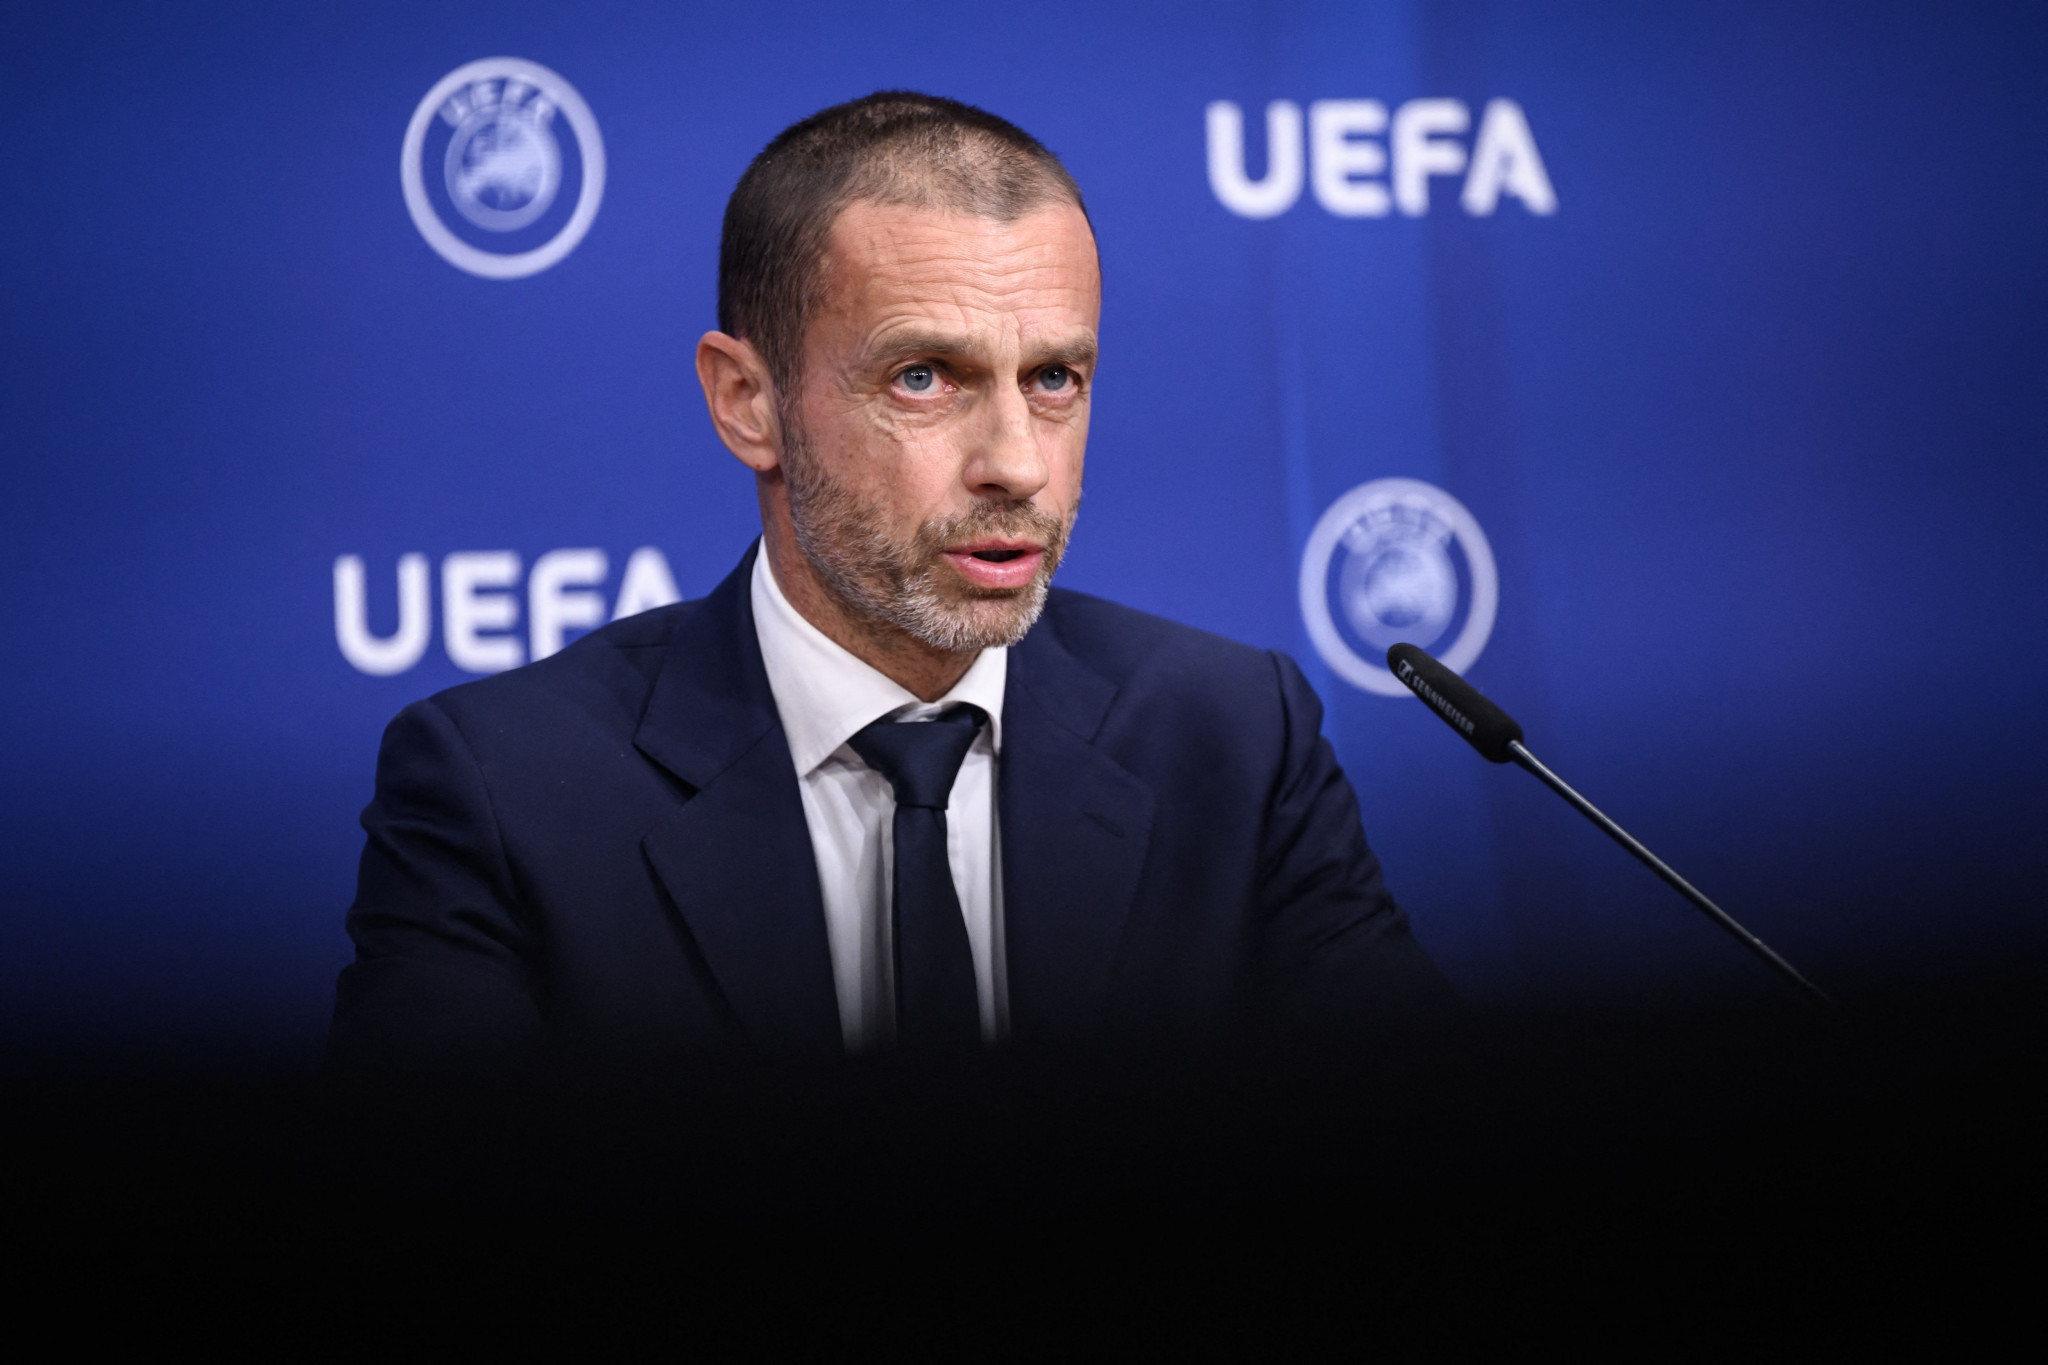 Čeferin set to be re-elected unopposed as UEFA President after being declared as sole candidate for role